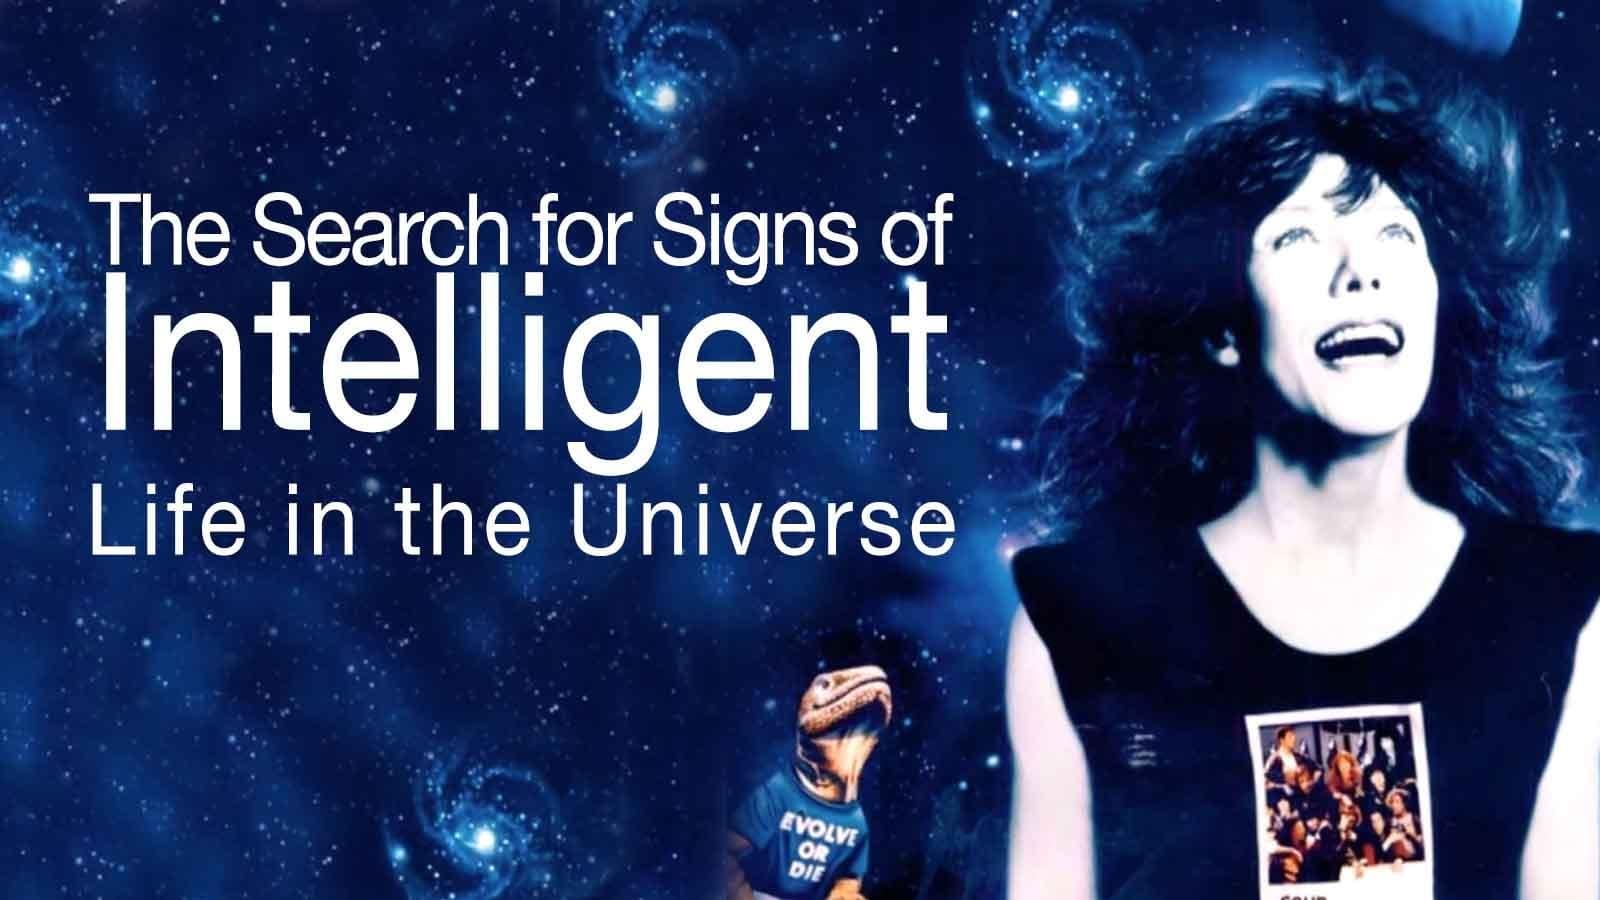 The Search for Signs of Intelligent Life in the Universe backdrop